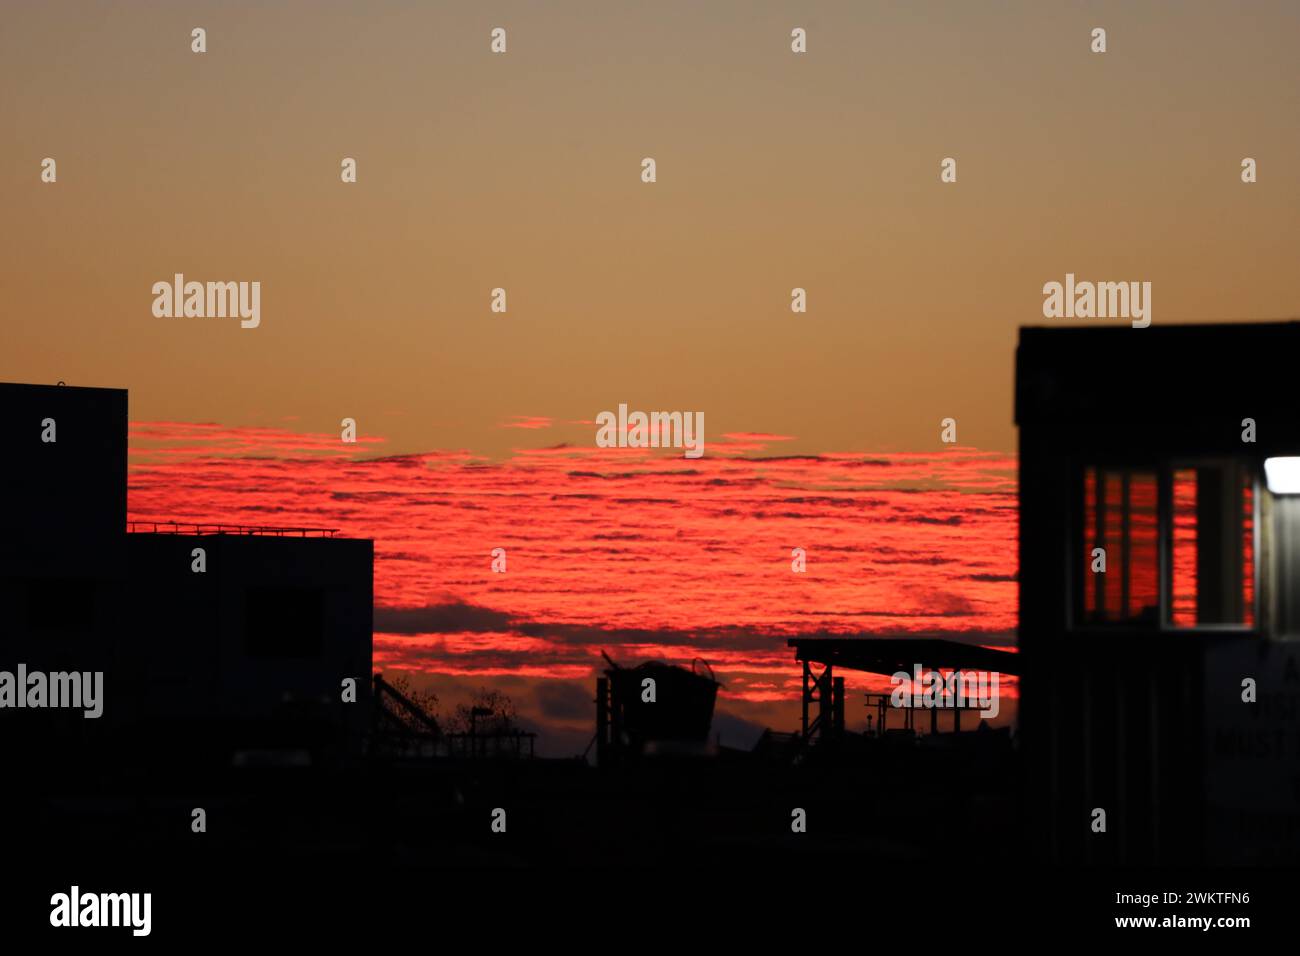 An image of various darkened structures and a red-pink winter sunrise as seen from the entrance to Tommy Thompson Park in Toronto, Ontario. Stock Photo